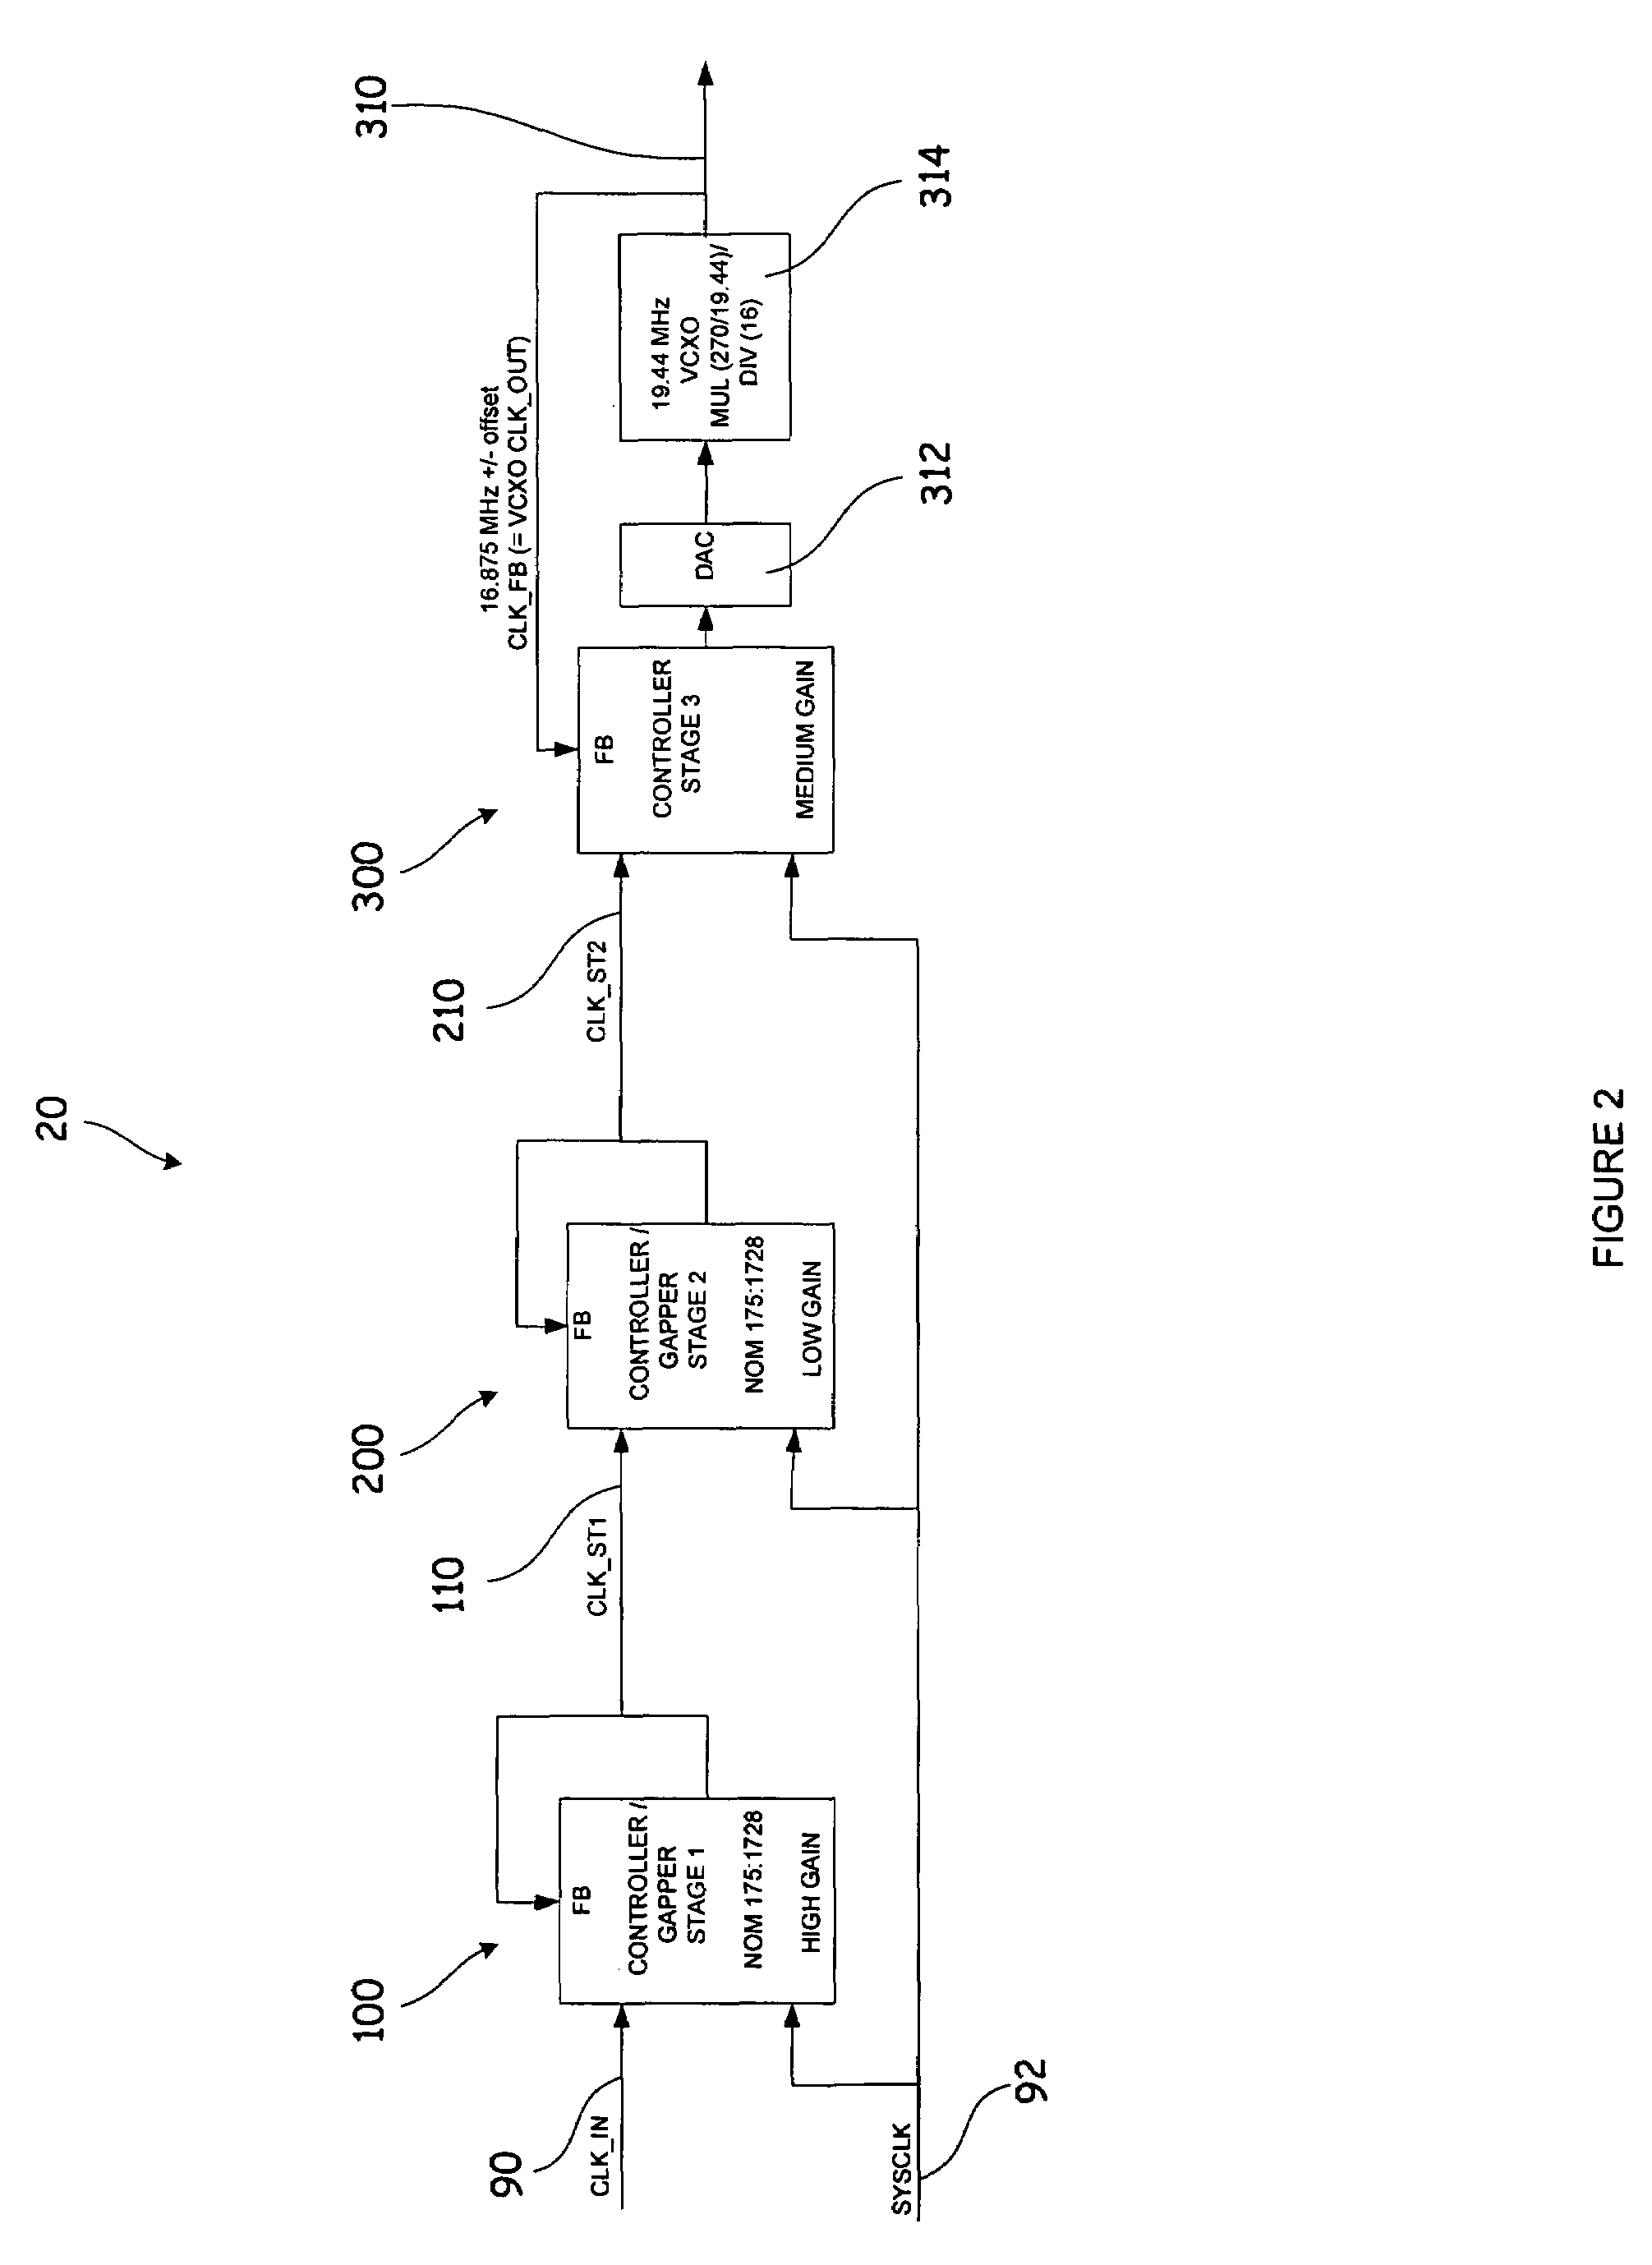 System and method for an adaptable timing recovery architecture for critically-timed transport applications